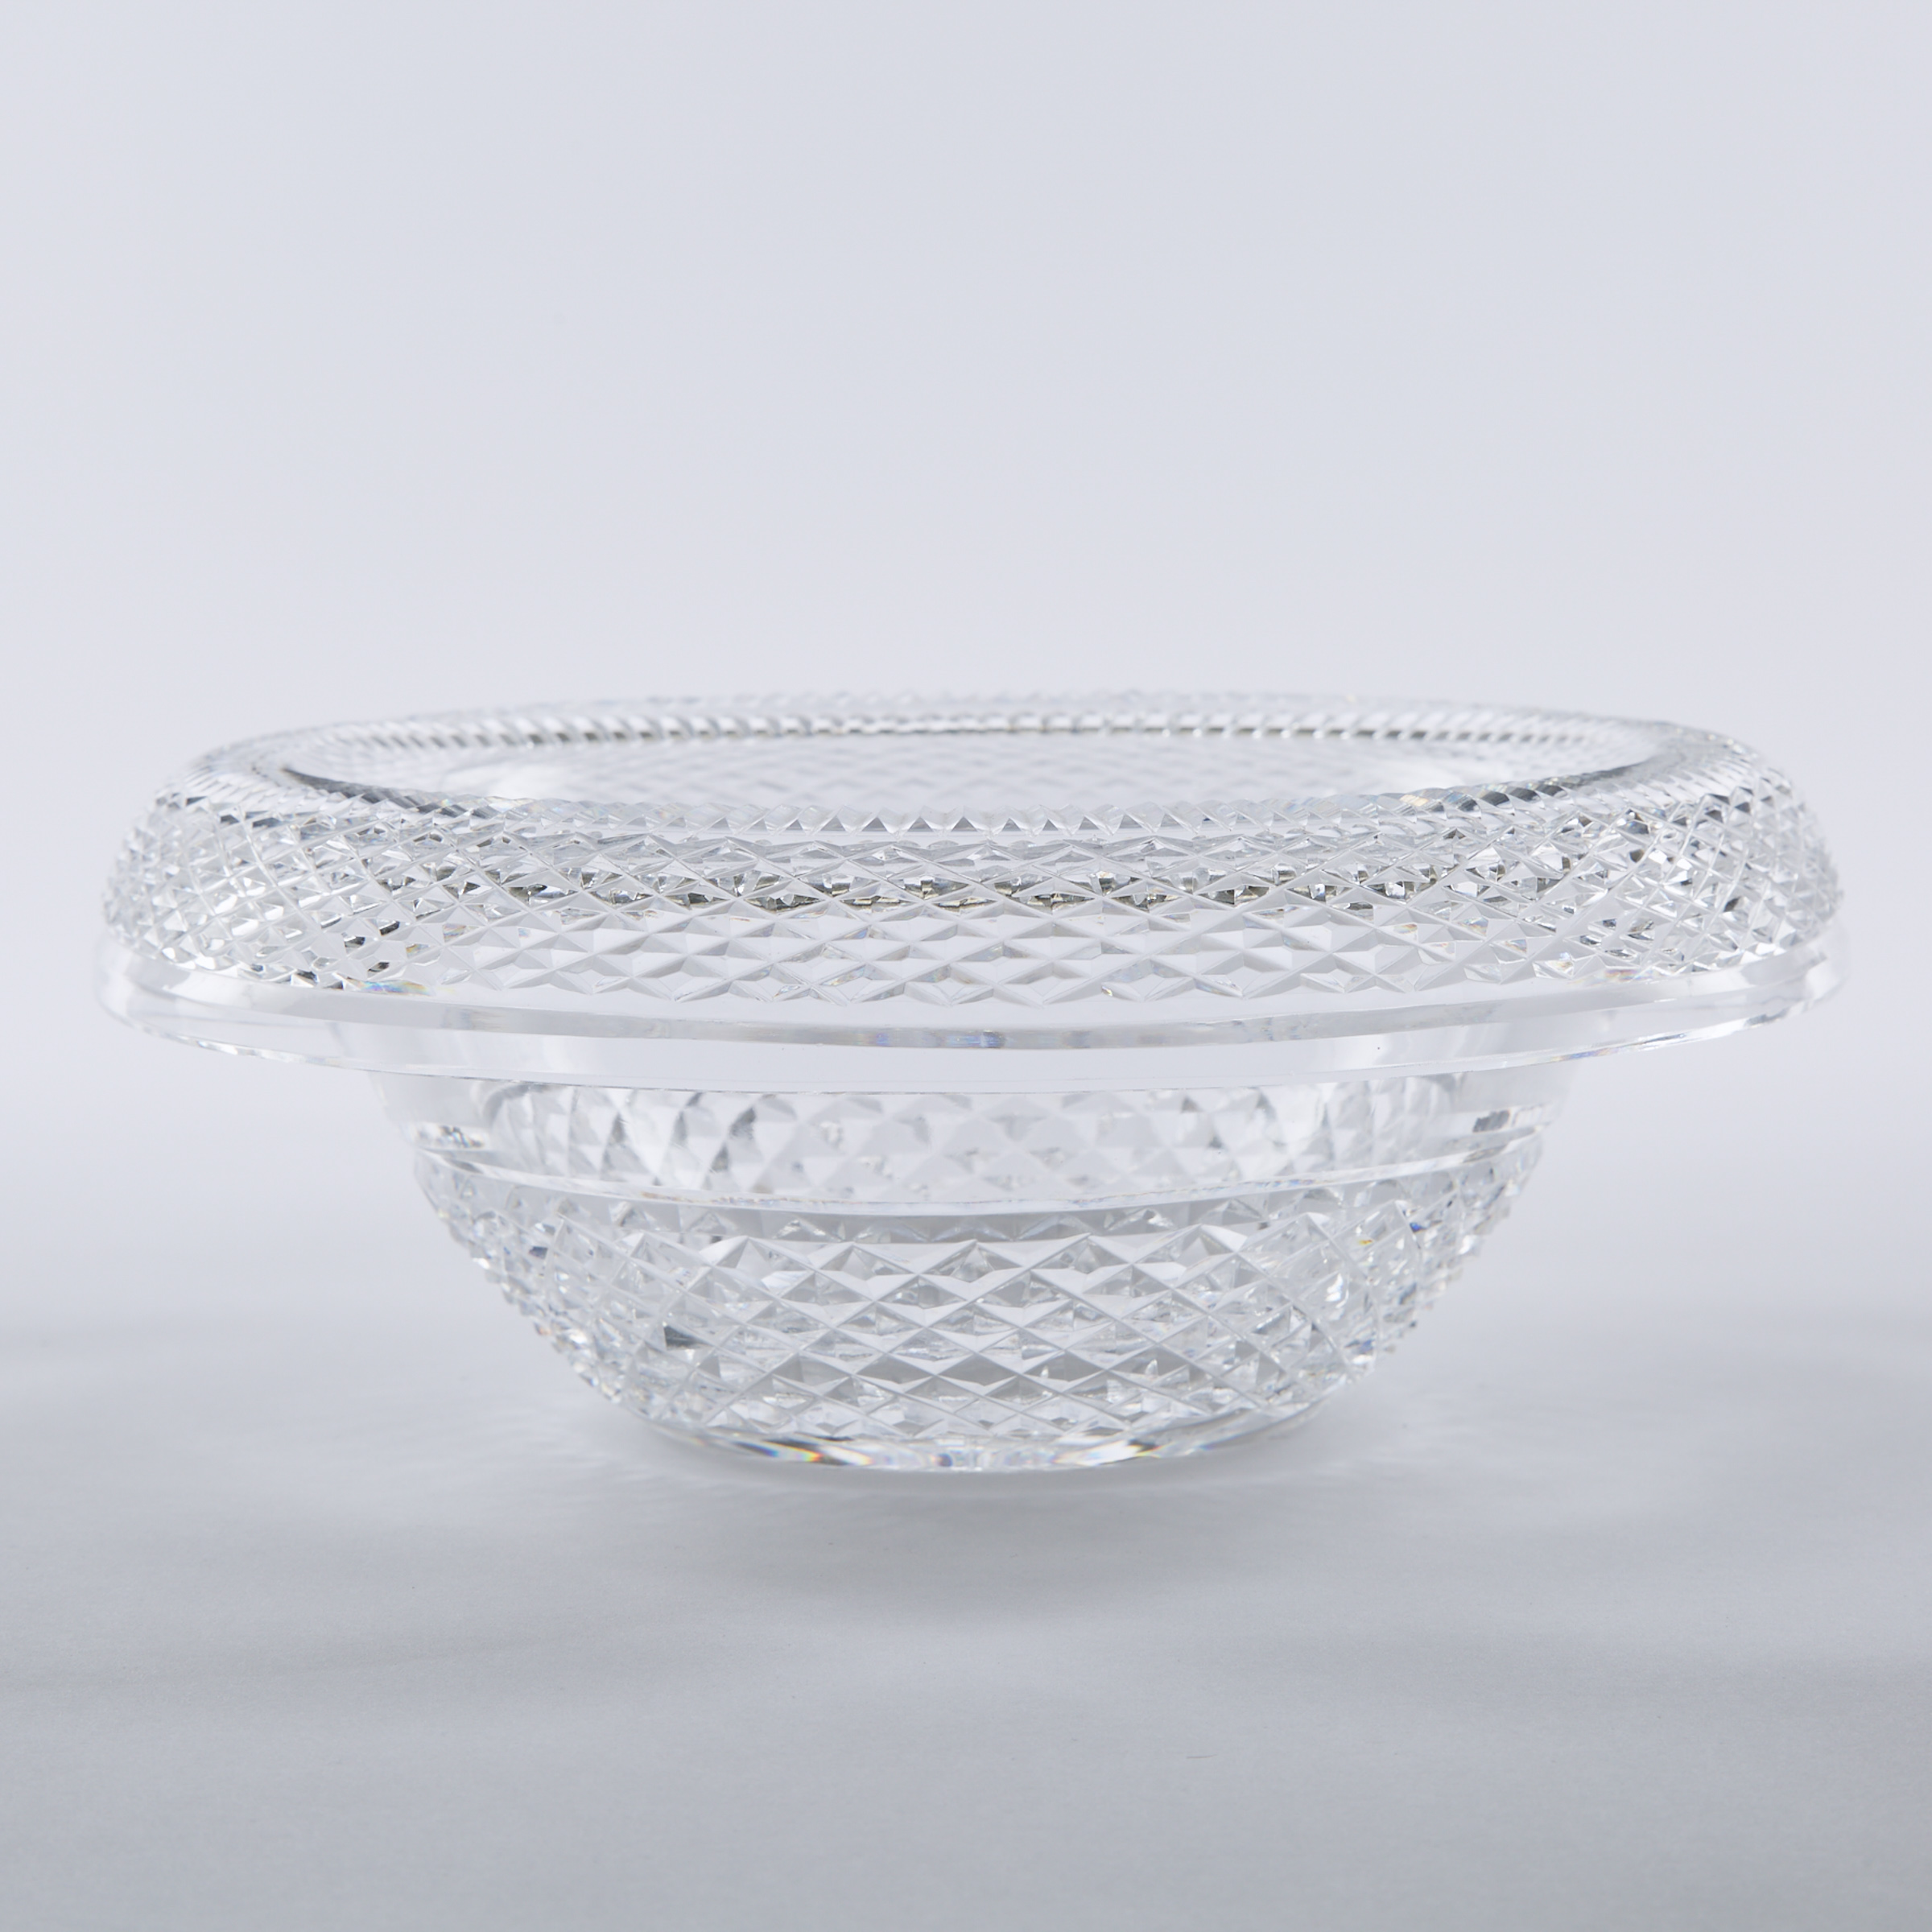 Waterford Cut Glass Bowl, 20th century